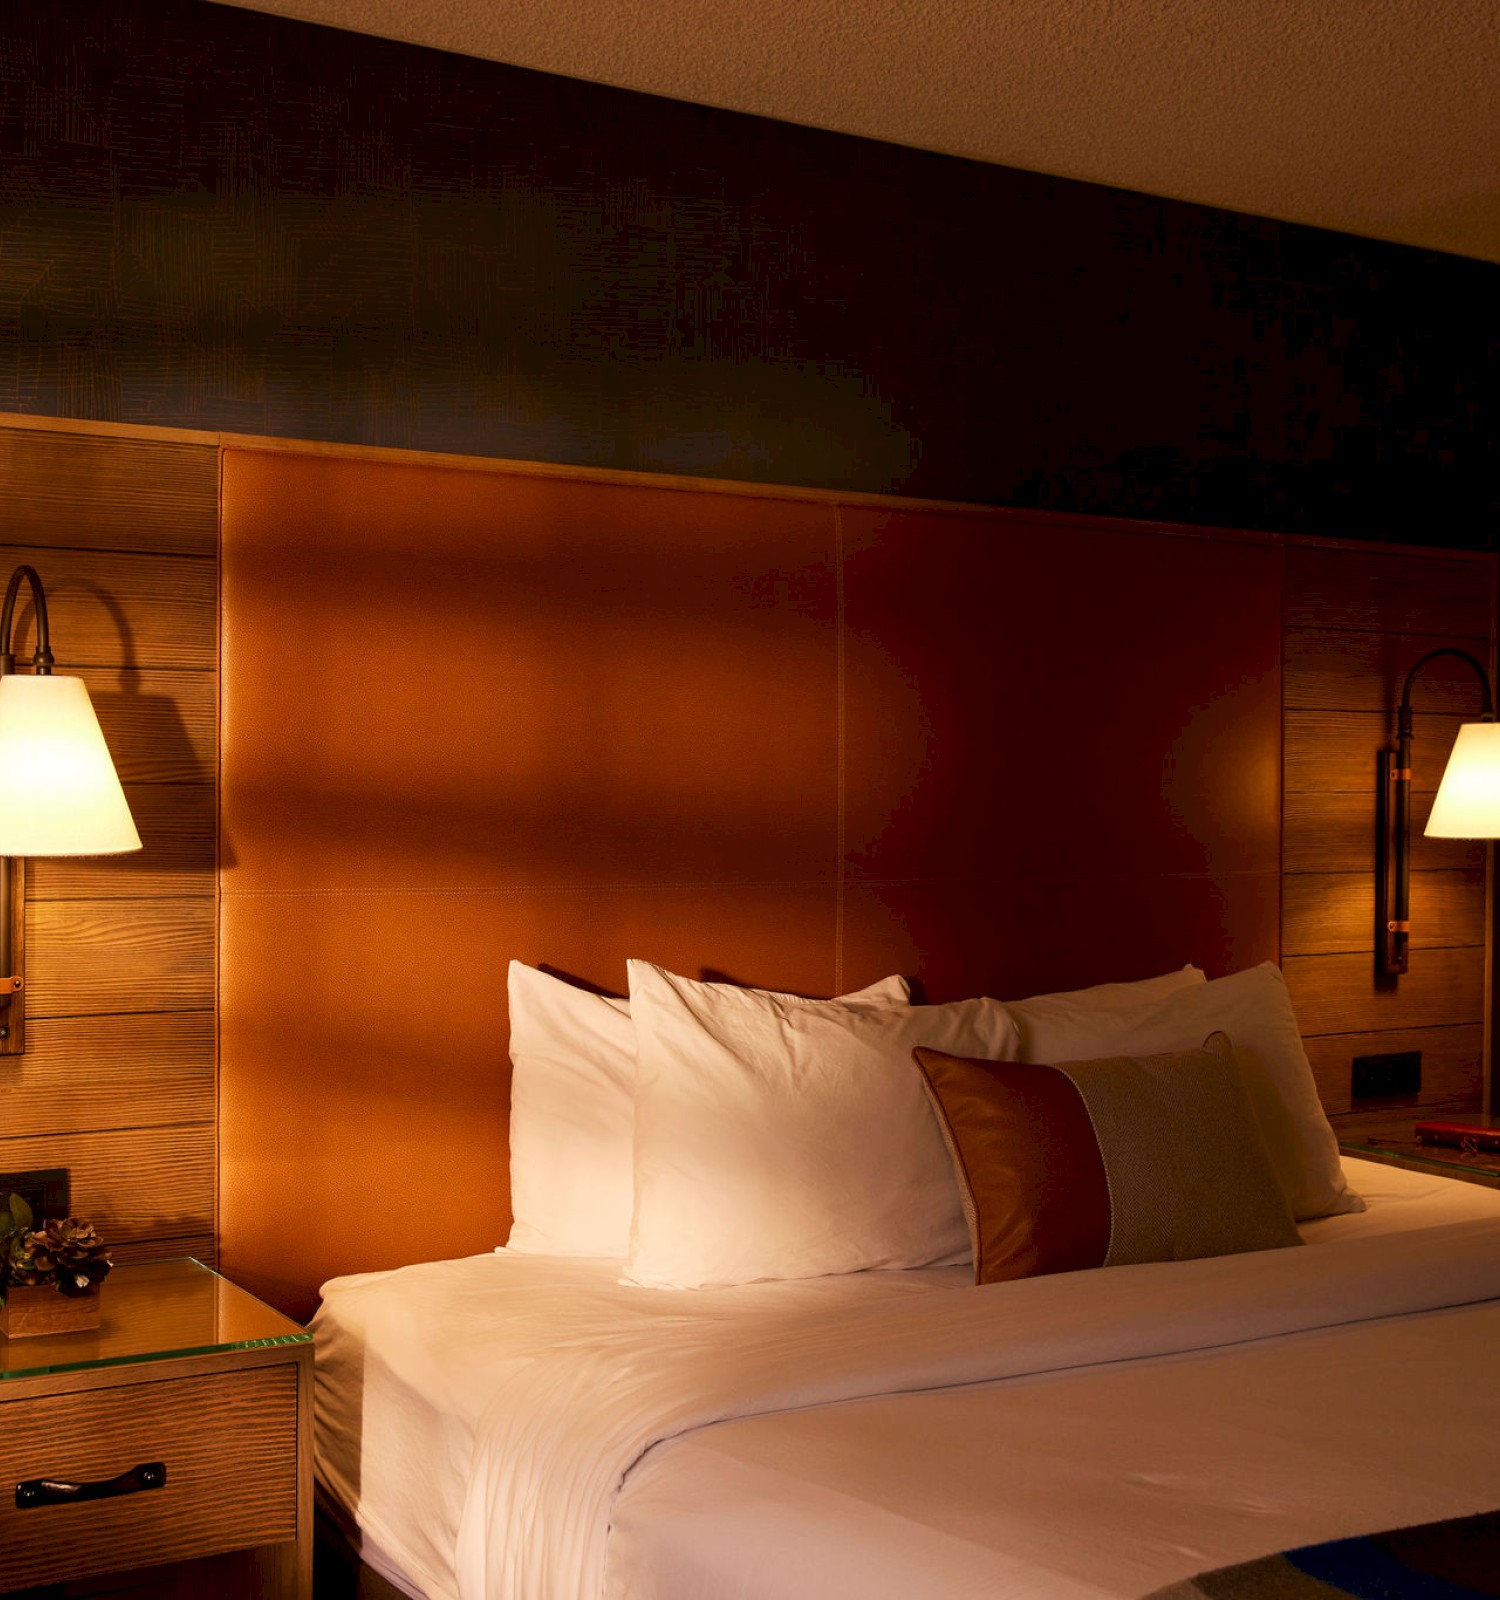 A cozy hotel room with a neatly made bed, twin bedside tables, and warm lighting from two wall-mounted lamps on either side of the bed.